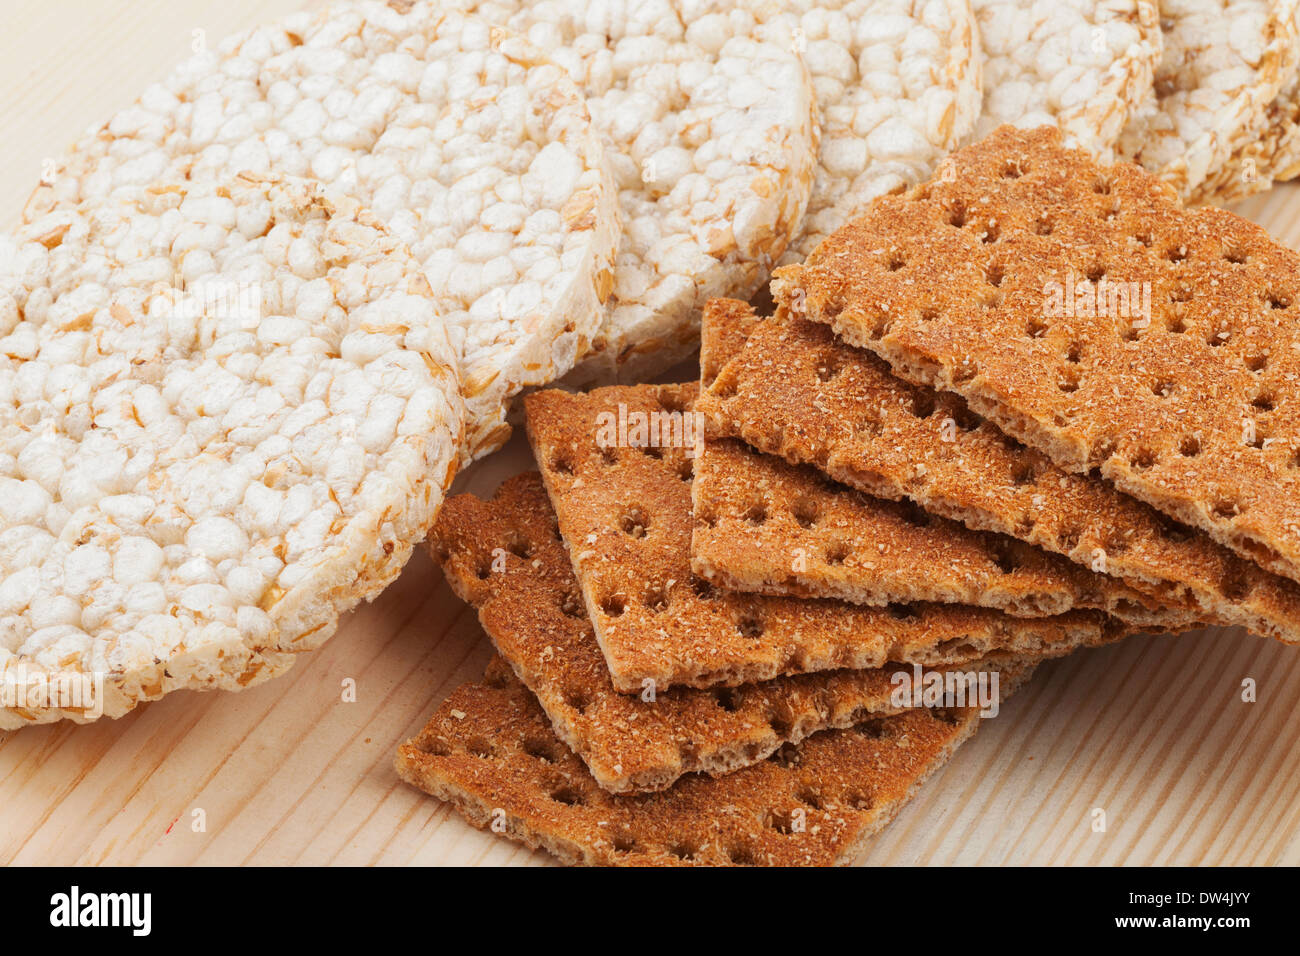 grain Crispbread, different types of cereal crackers on table Stock Photo